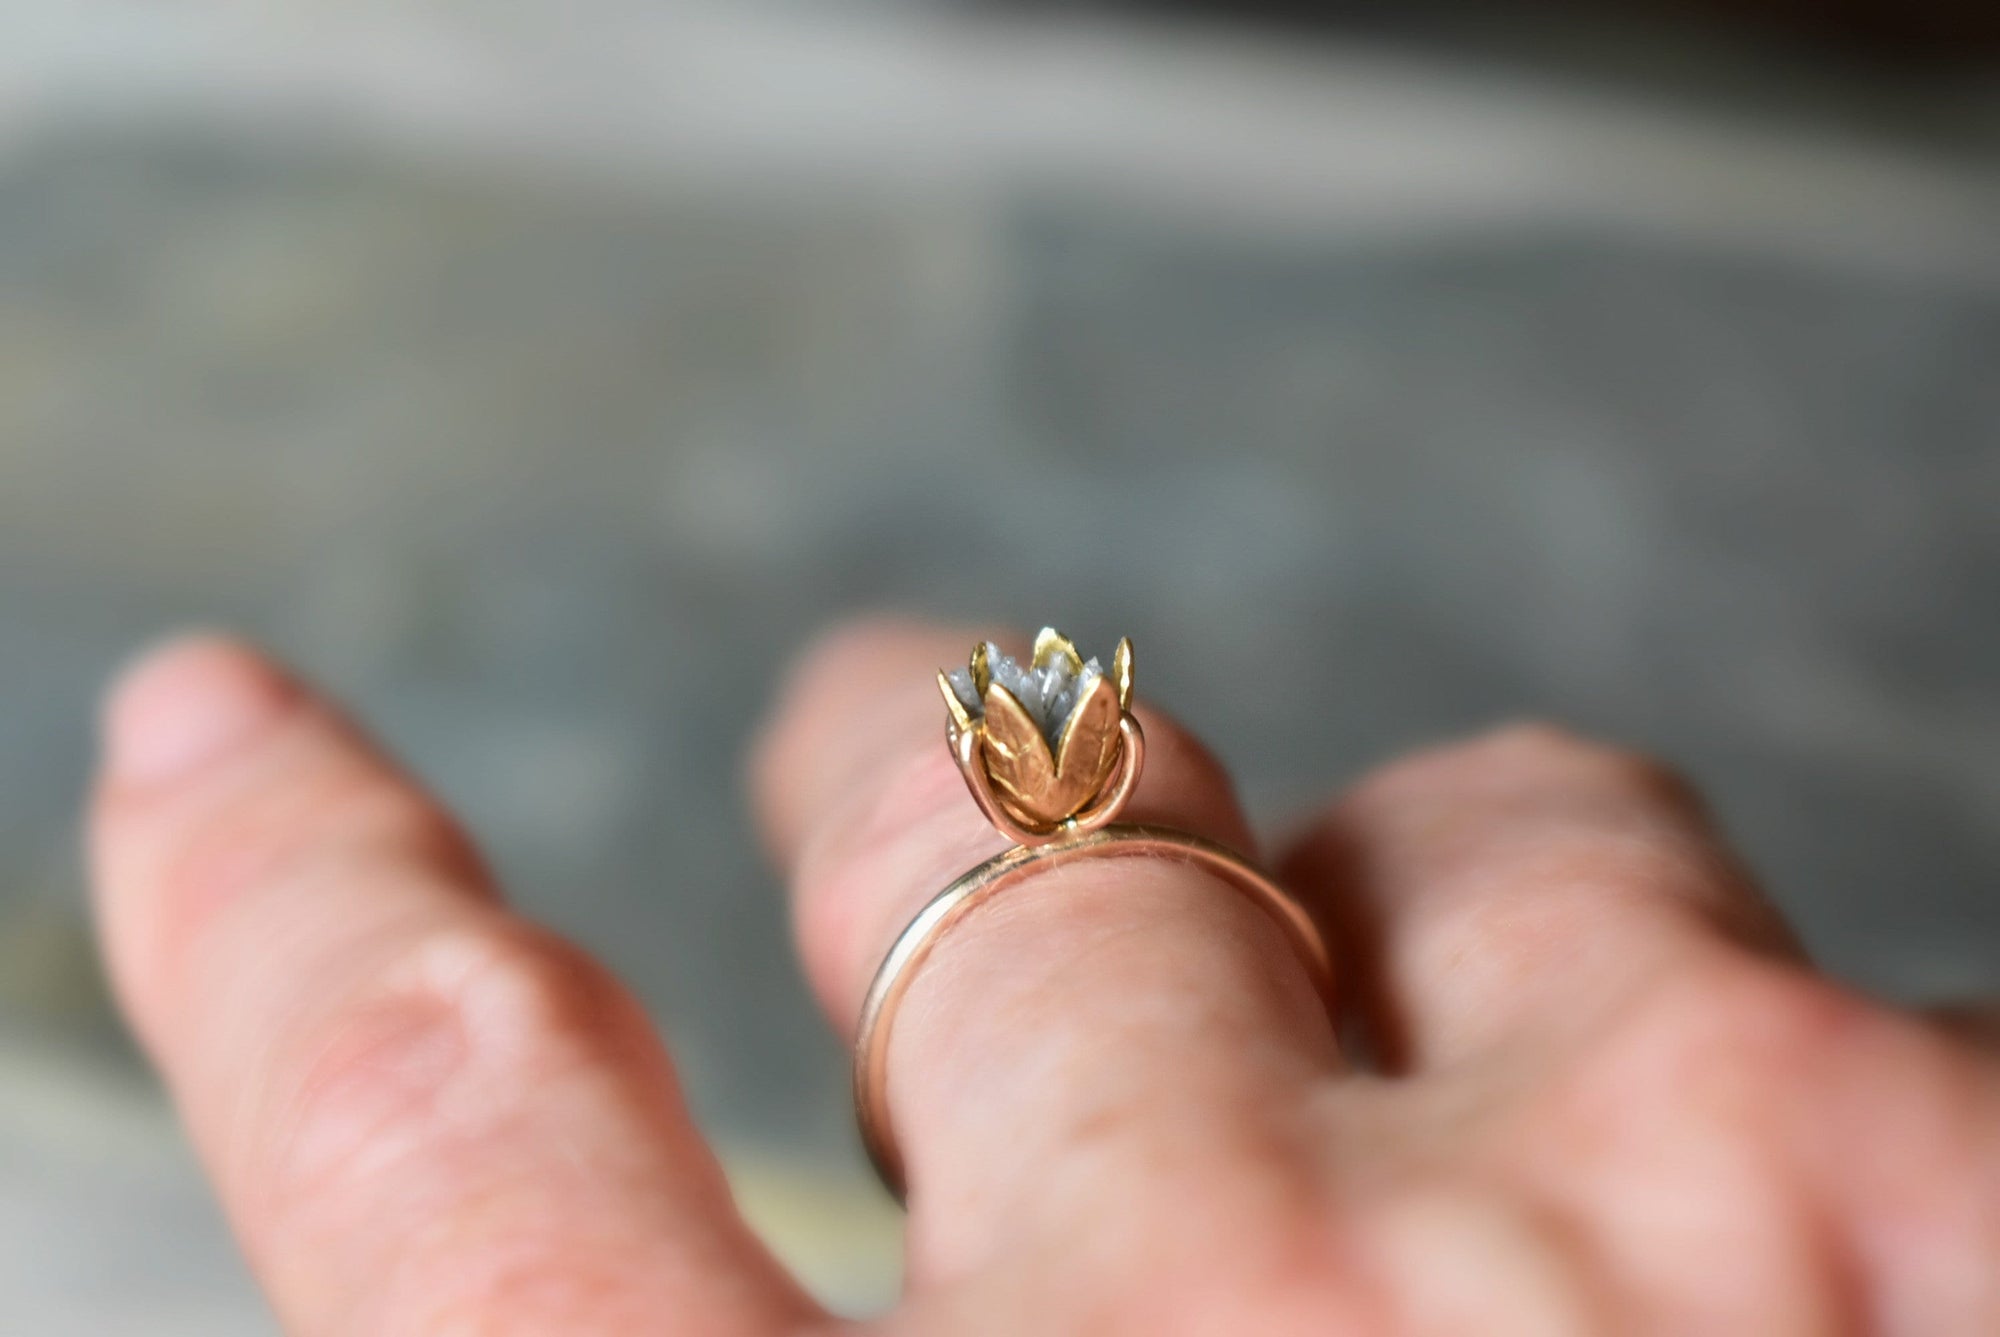 Authentic Diamond and Gold Ring, Unique Unusual Raw Diamond Pipes, Lotus or Tulip Flower Ring, Uncommon Diamond Wedding Day Gift for Wife